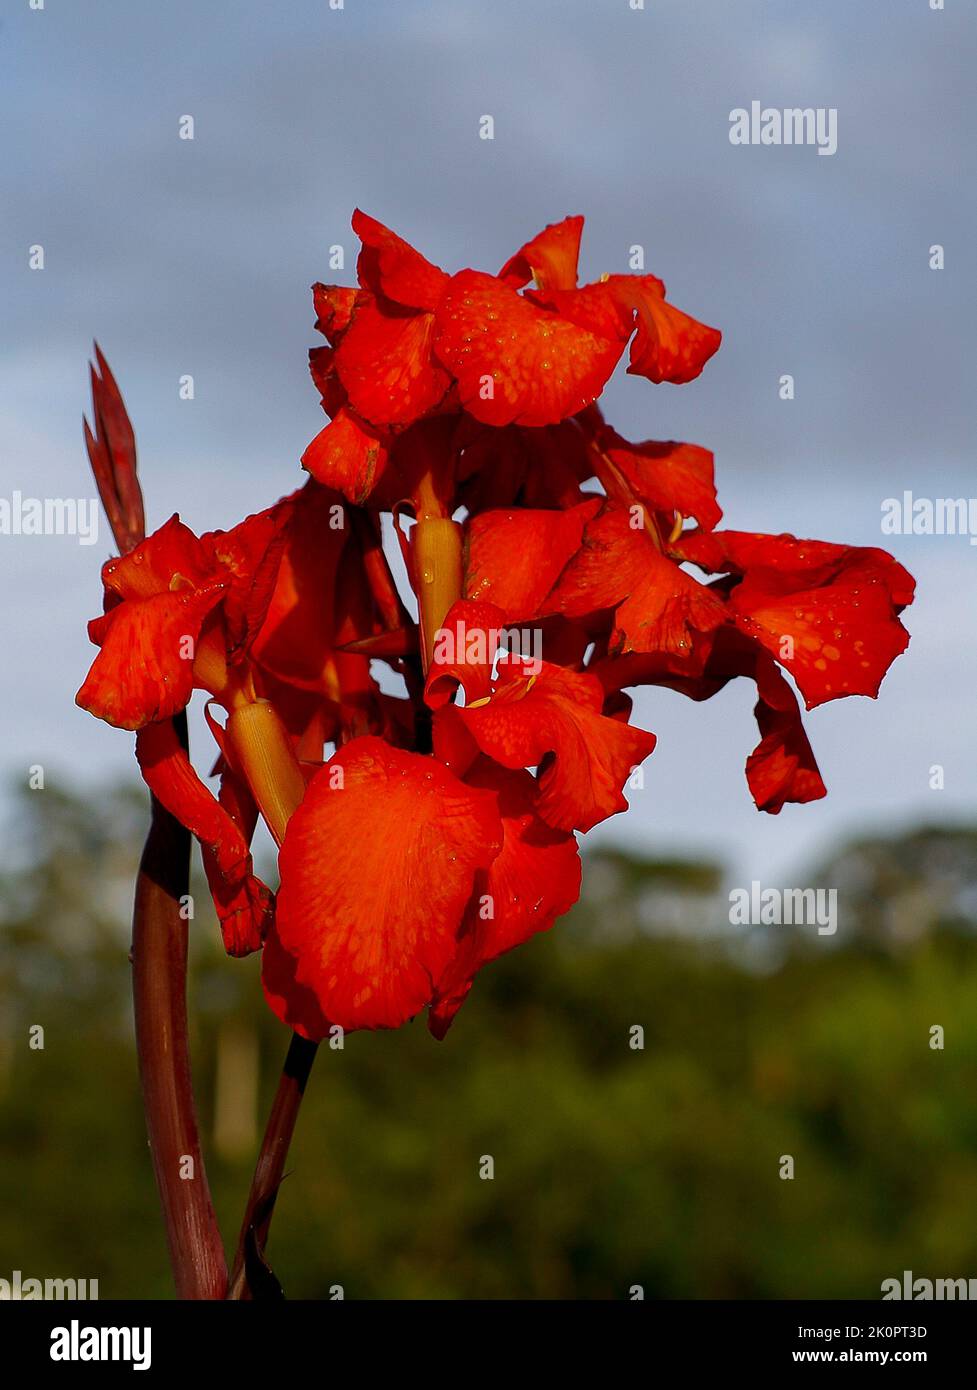 Bright red flowers of a Canna lily cultivar in summer sunshine against a grey sky in a private garden in Queensland, Australia. Stock Photo